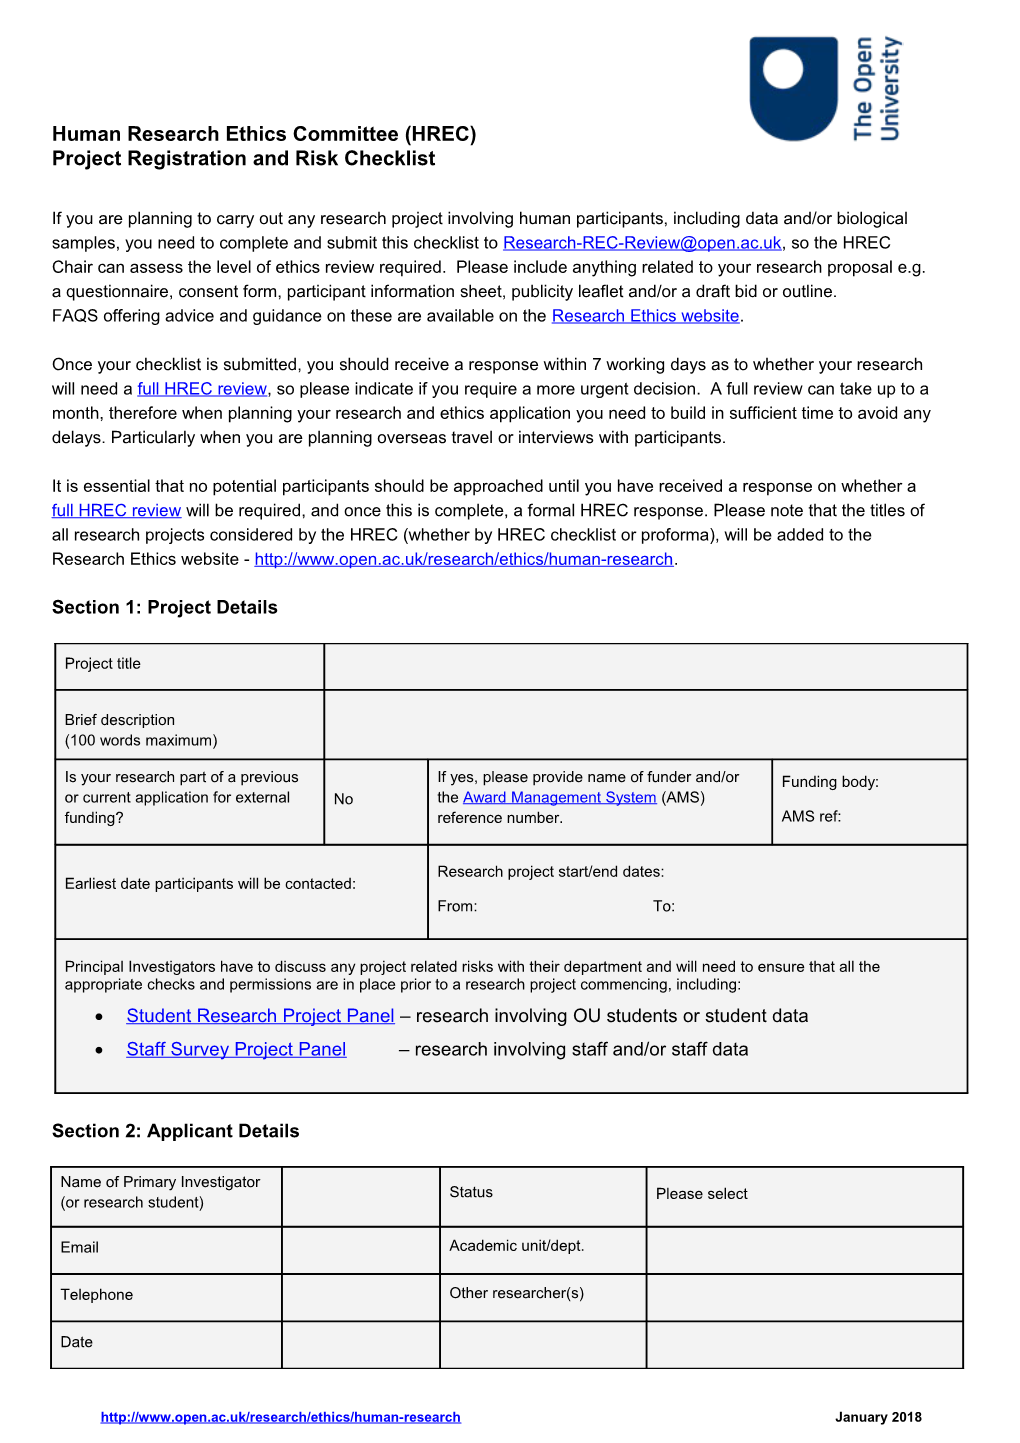 Human Research Ethics Committee Project Registration and Risk Checklist